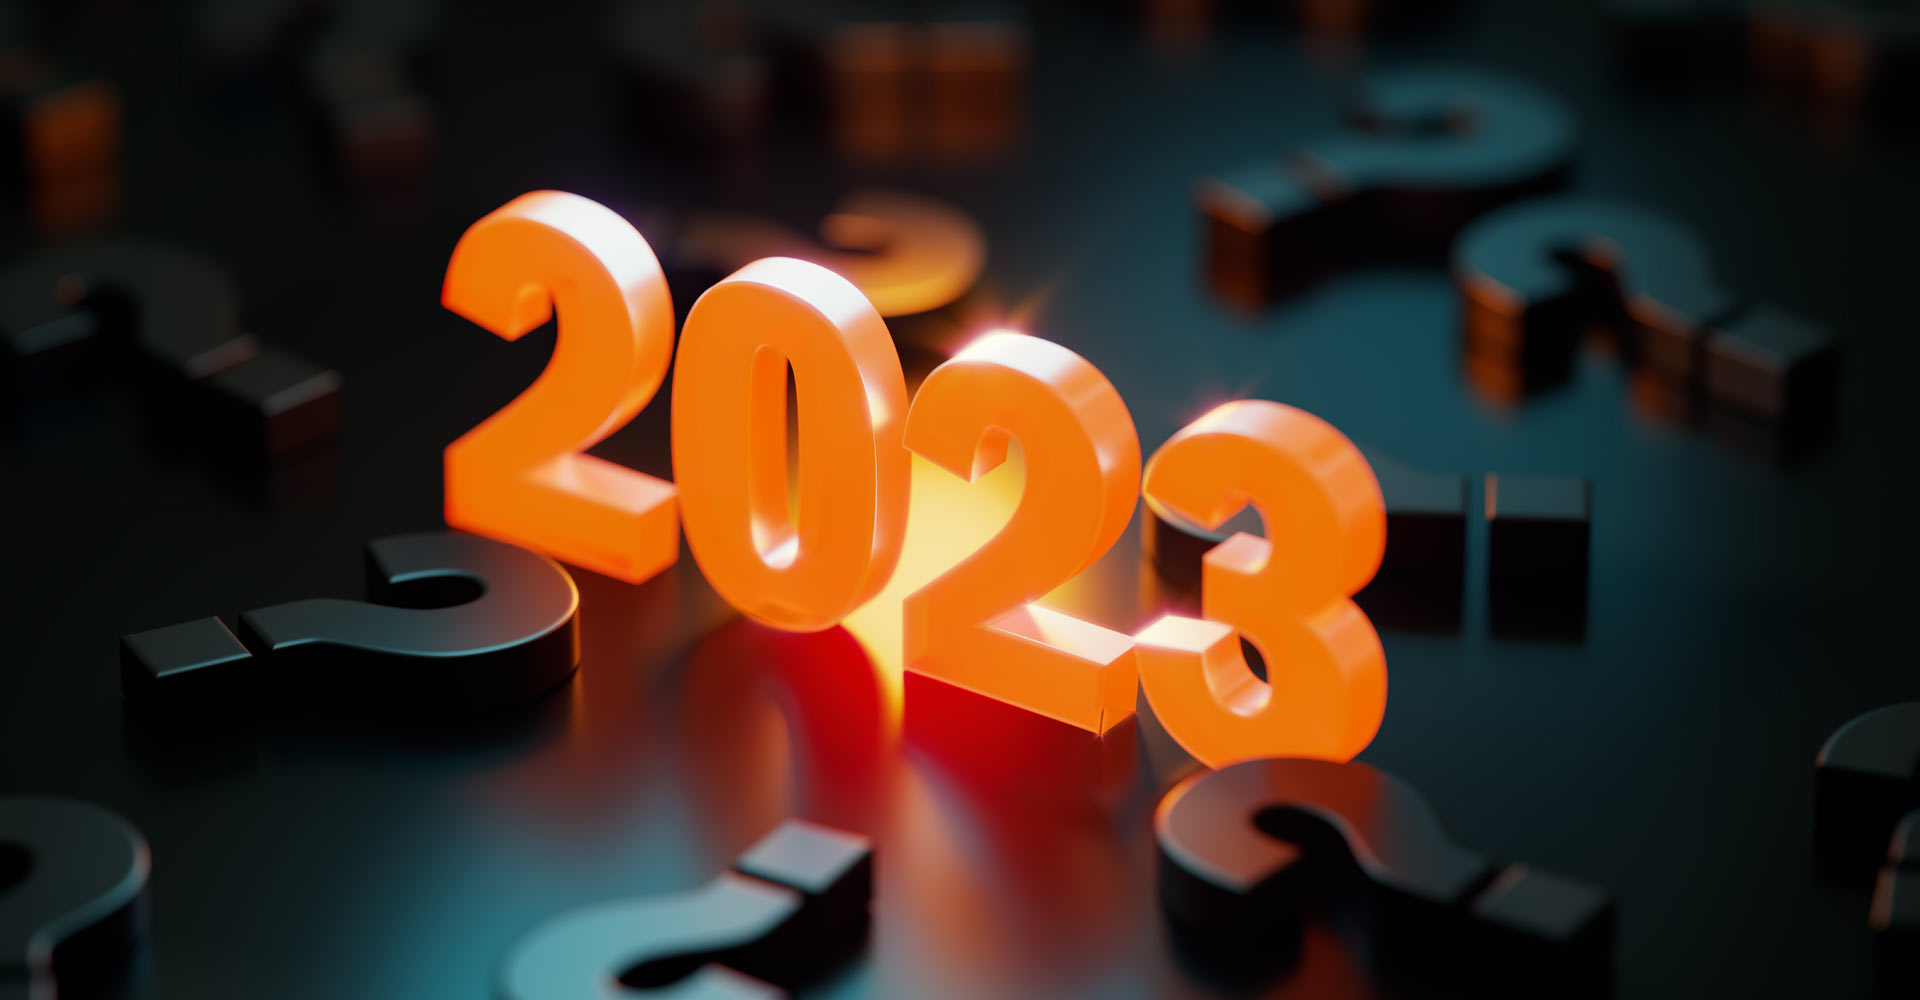 3 major cybersecurity predictions for the new year